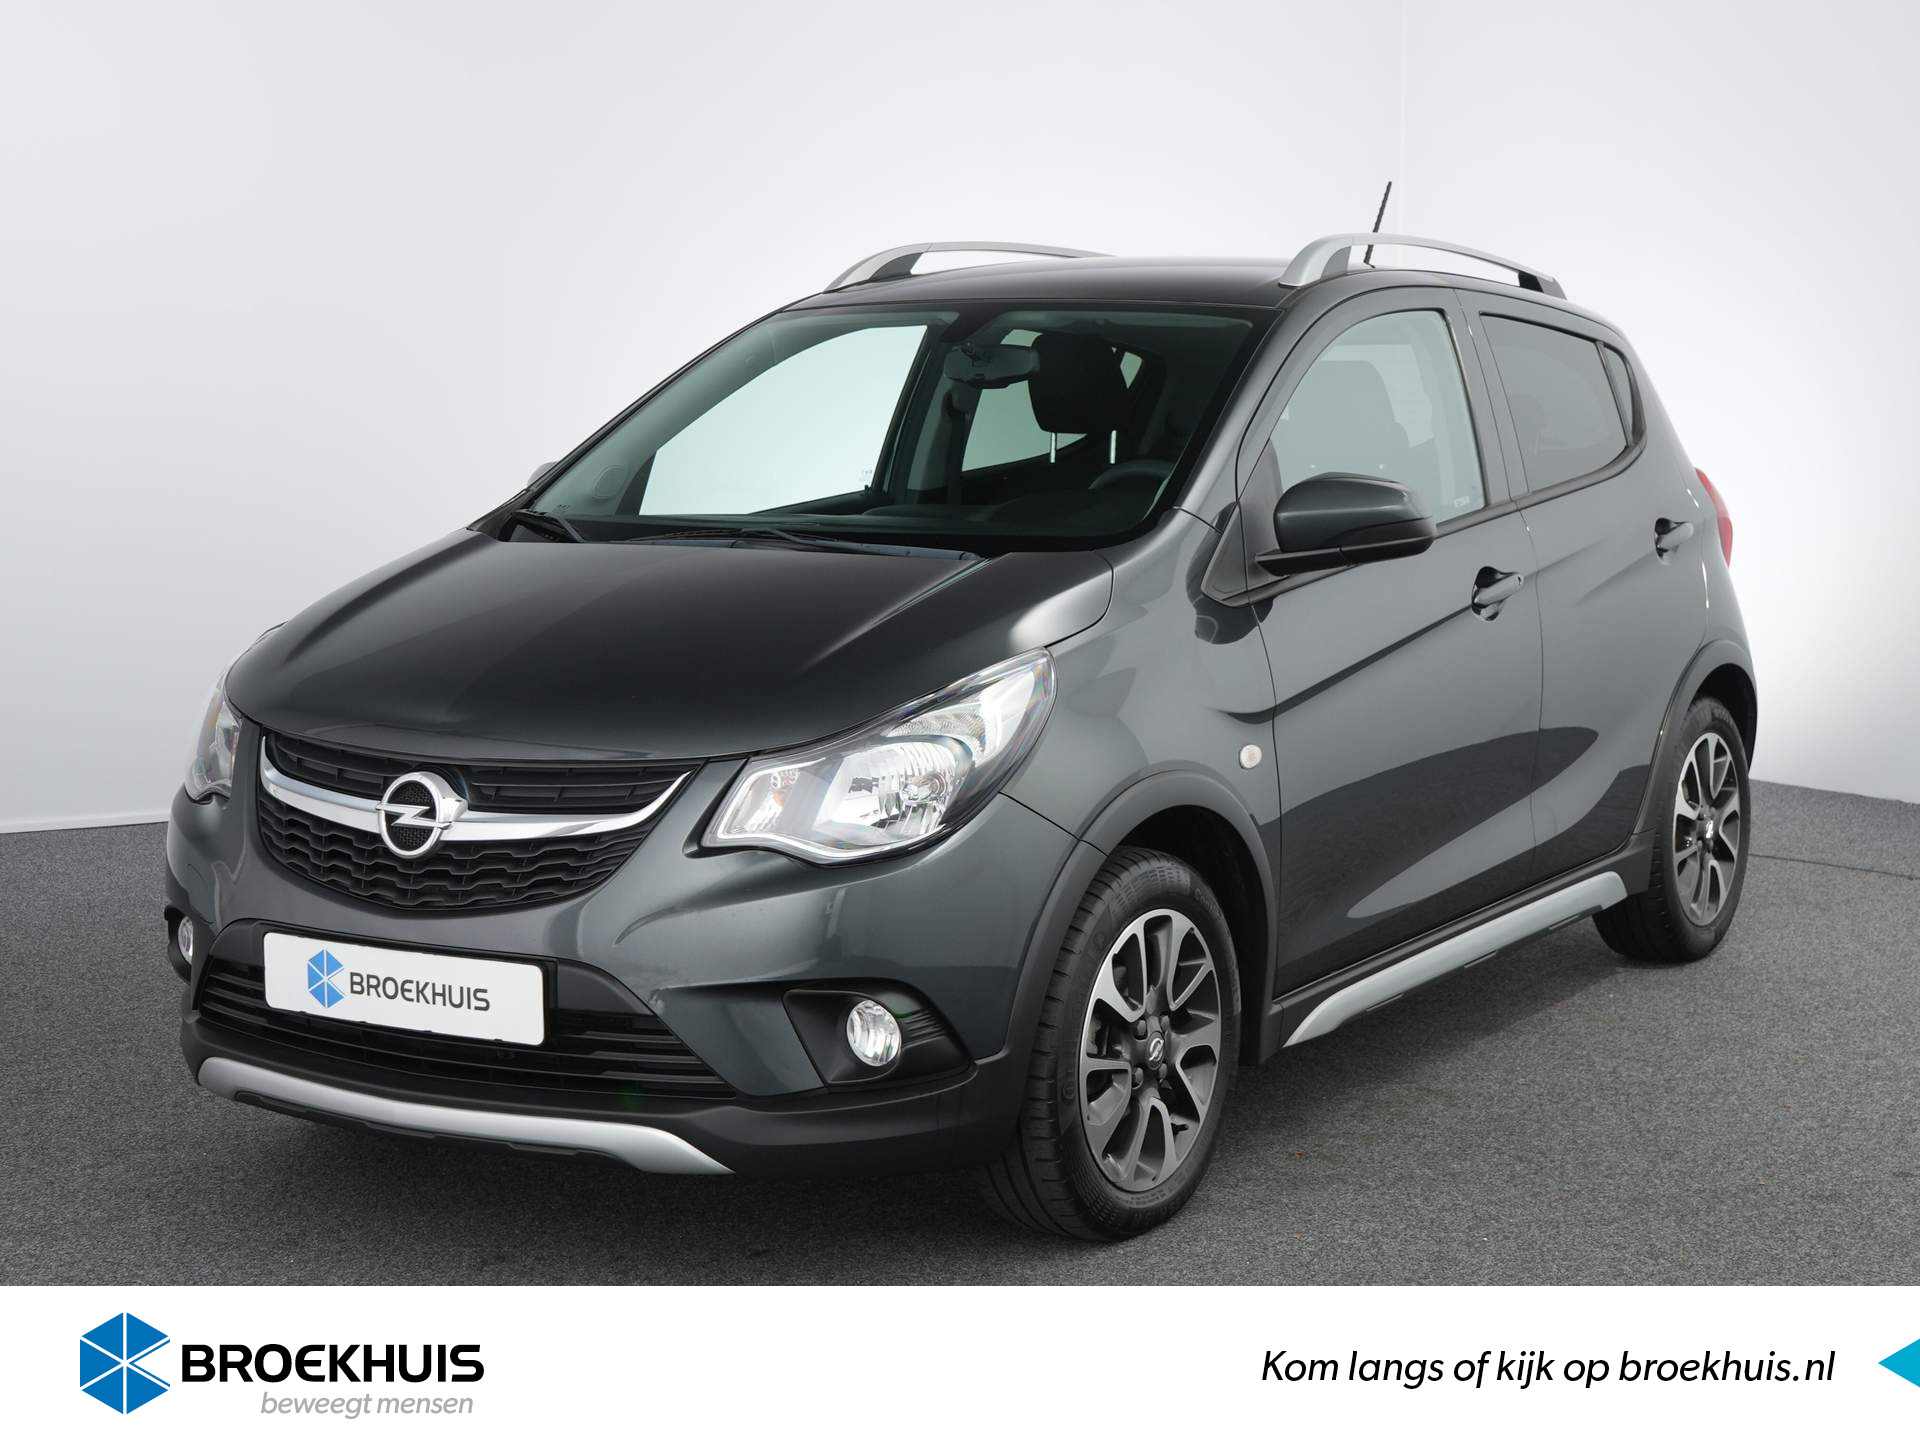 Opel KARL Karl 1.0 S/S Rocks Online Edition | Apple Carplay/Android auto | Cruise controle | Parkeersensoren | Airco